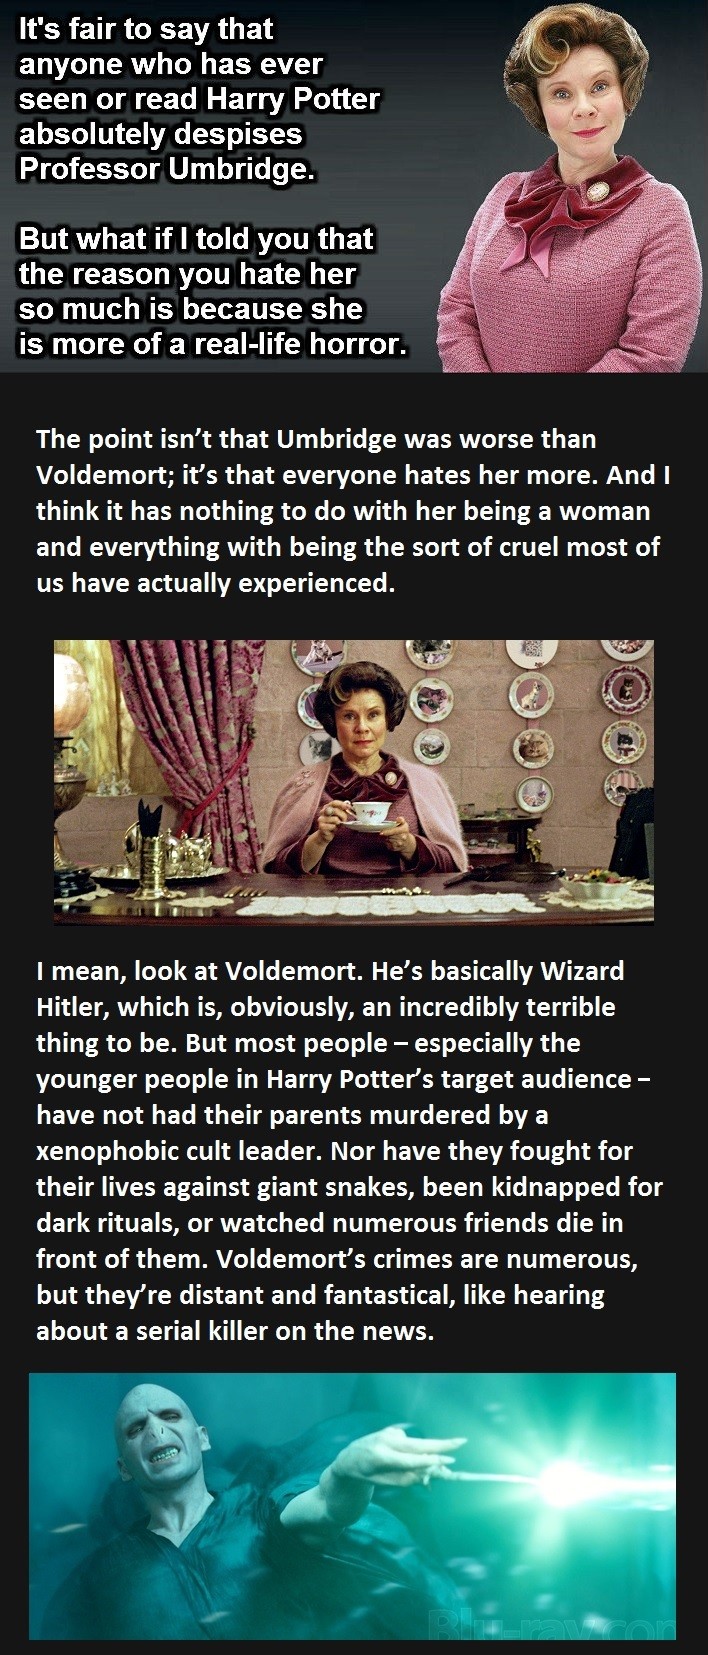 Why We Hate Professor Umbridge from Harry Potter So Much